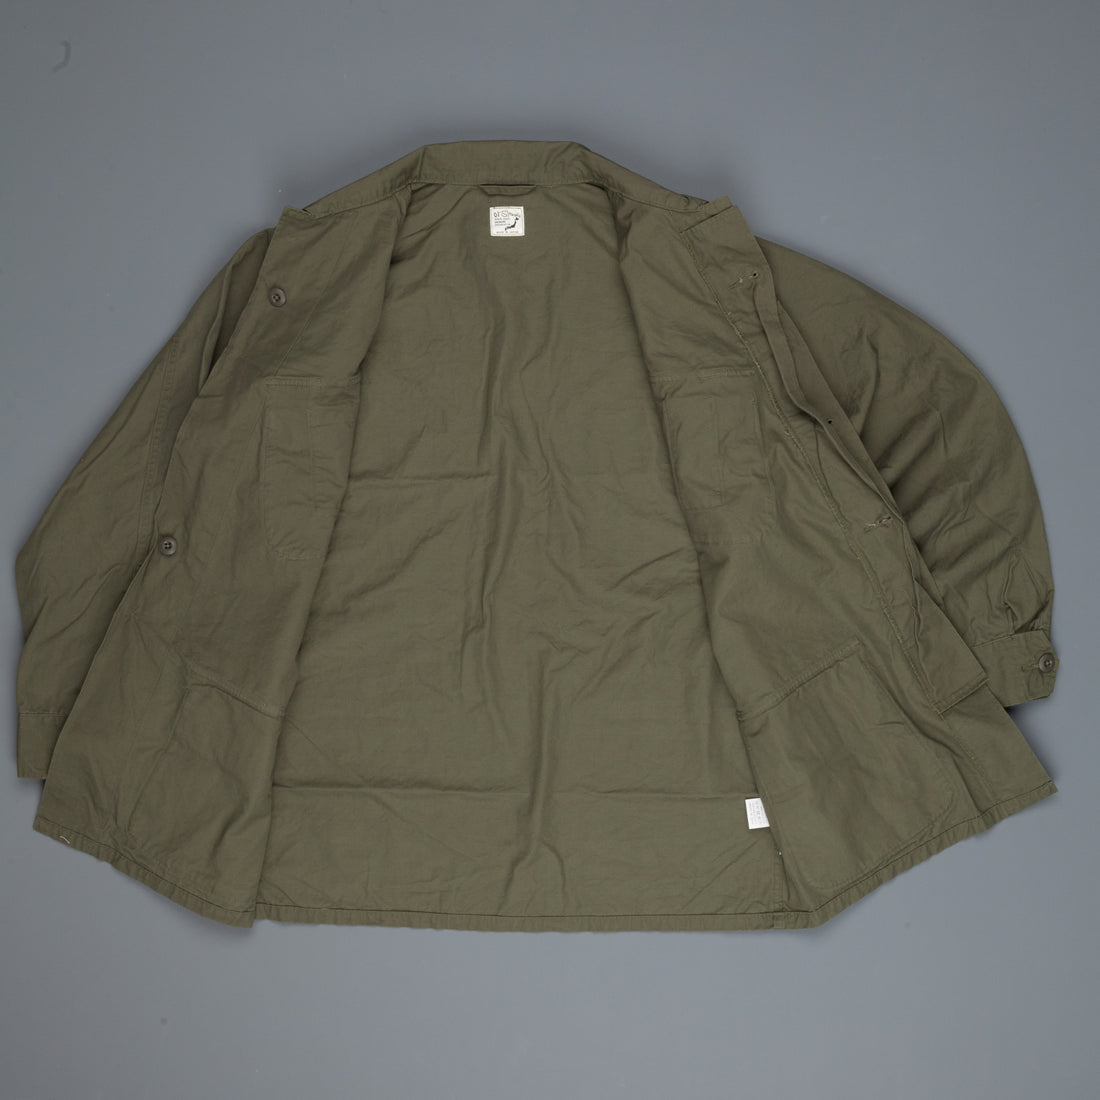 Orslow Tropical Coat 6010 Army